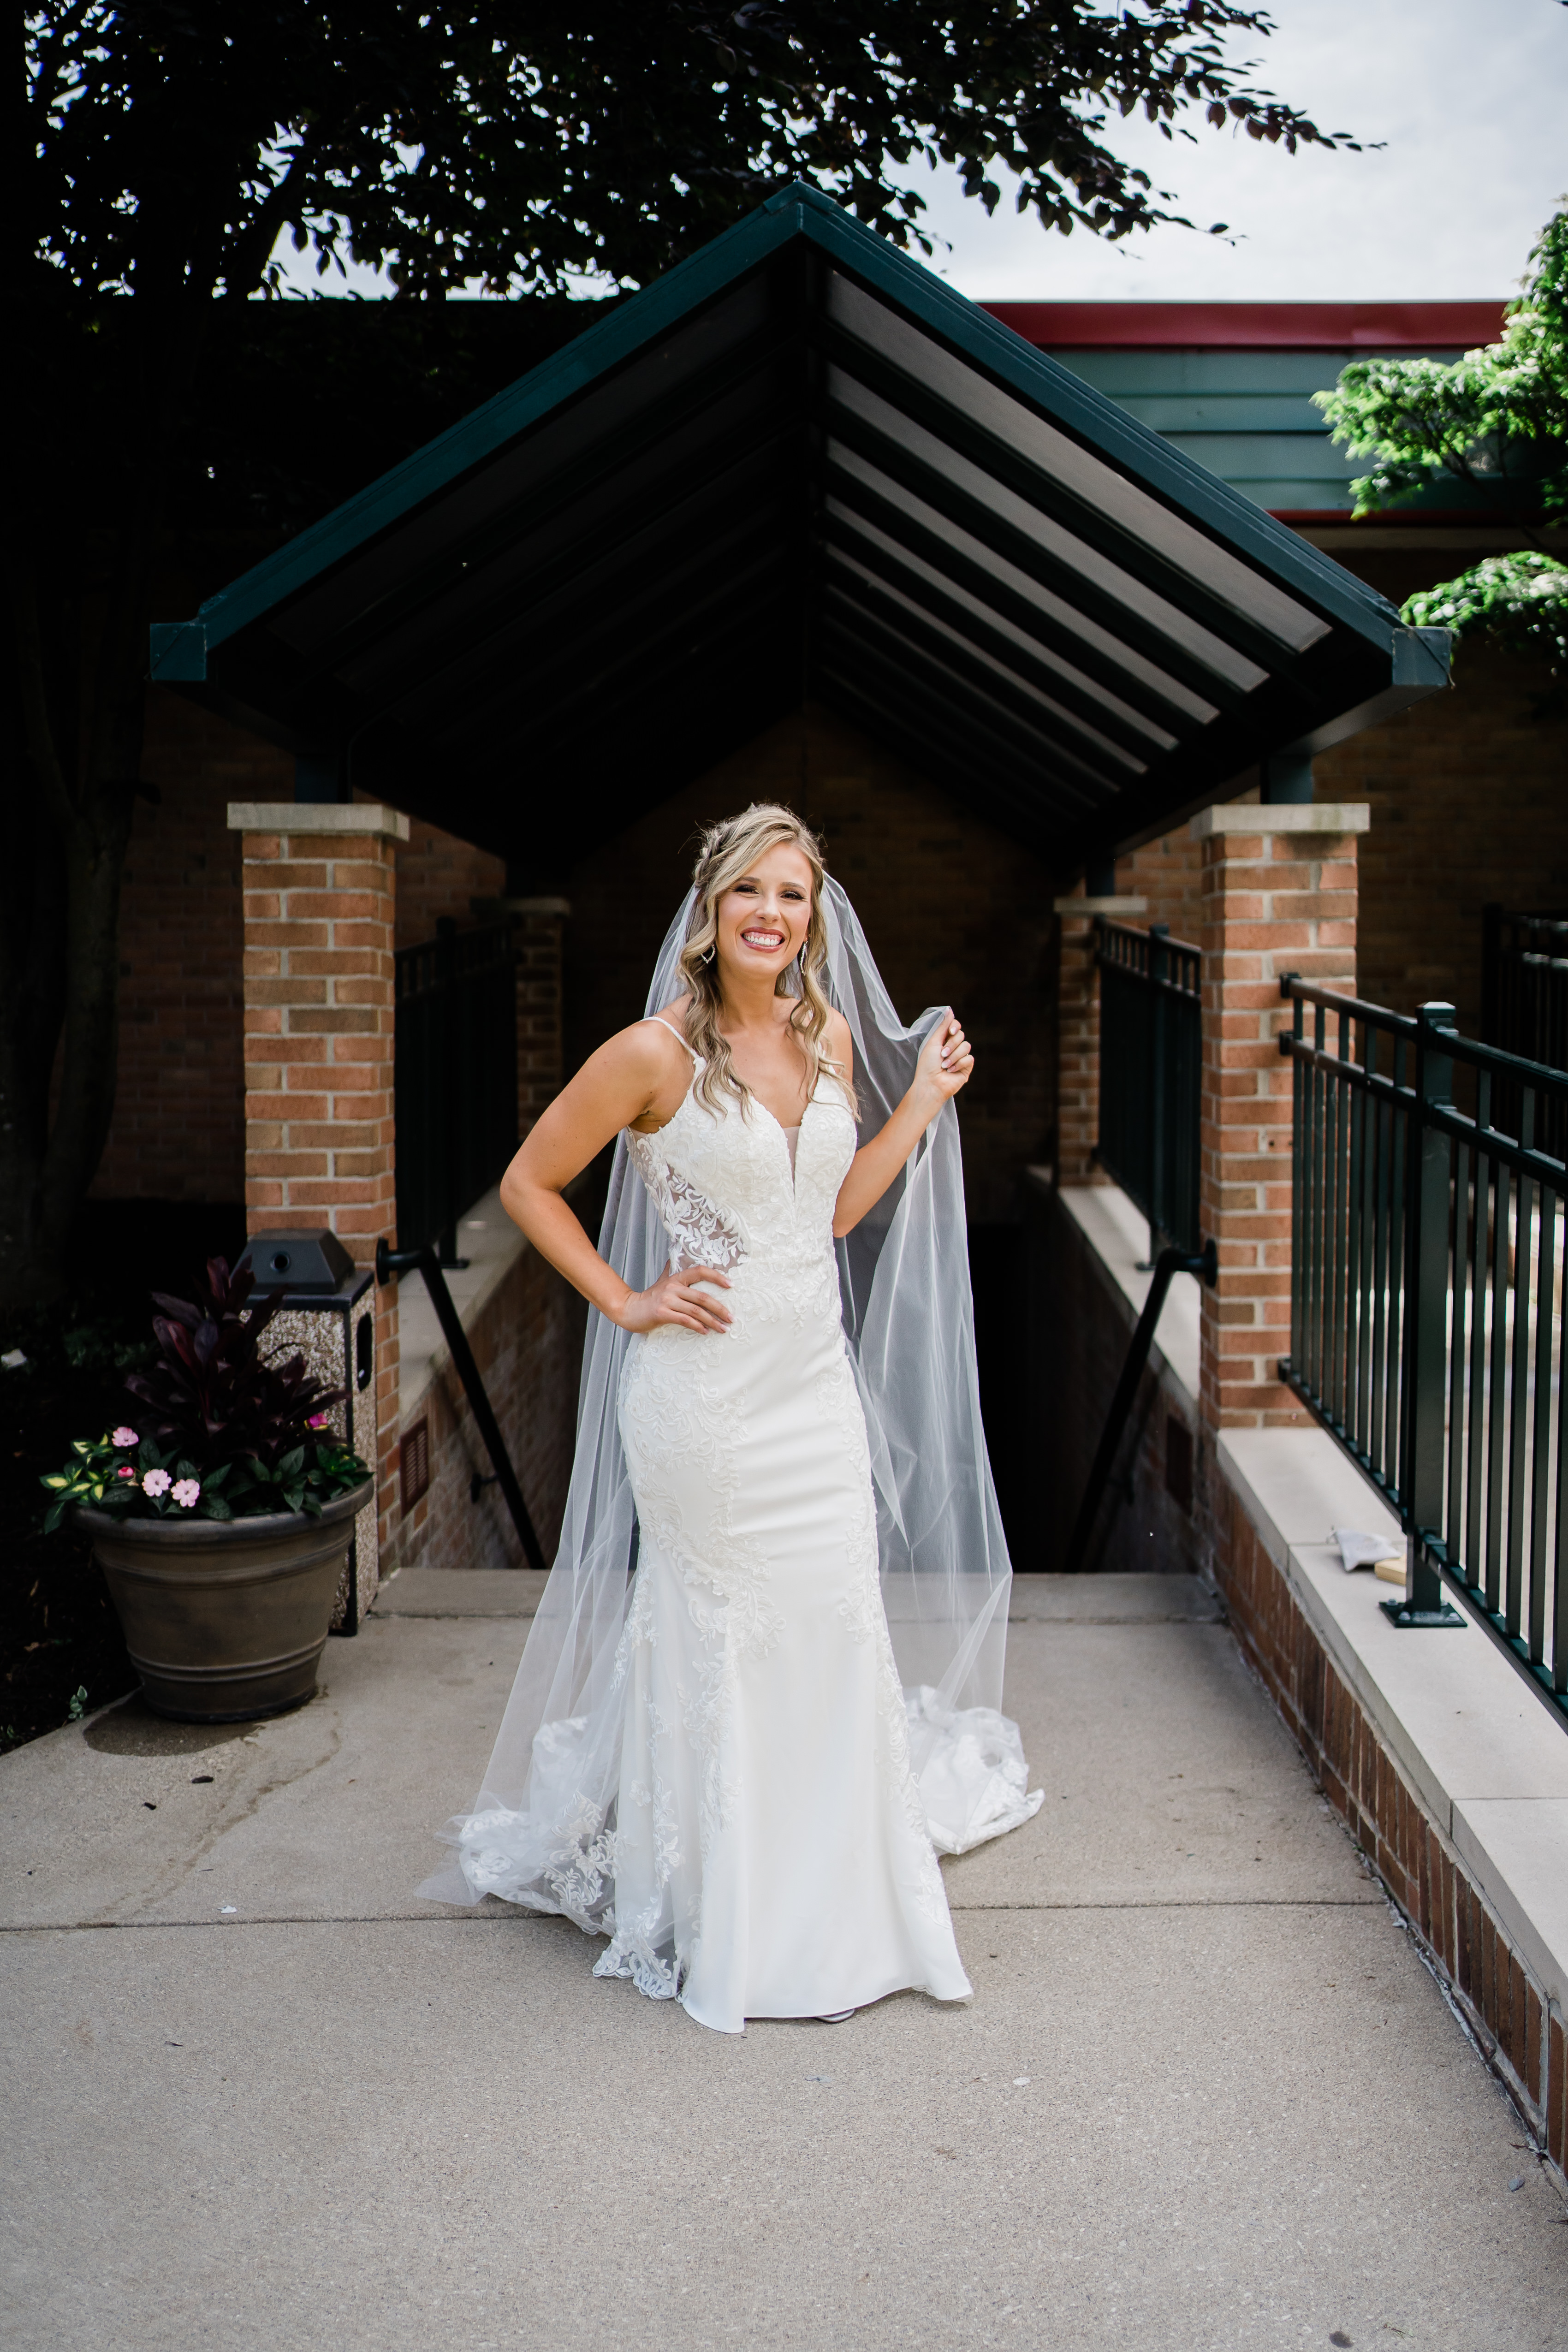 Fort Wayne wedding photographers capture bride standing and smiling during portraits before stunning country club wedding